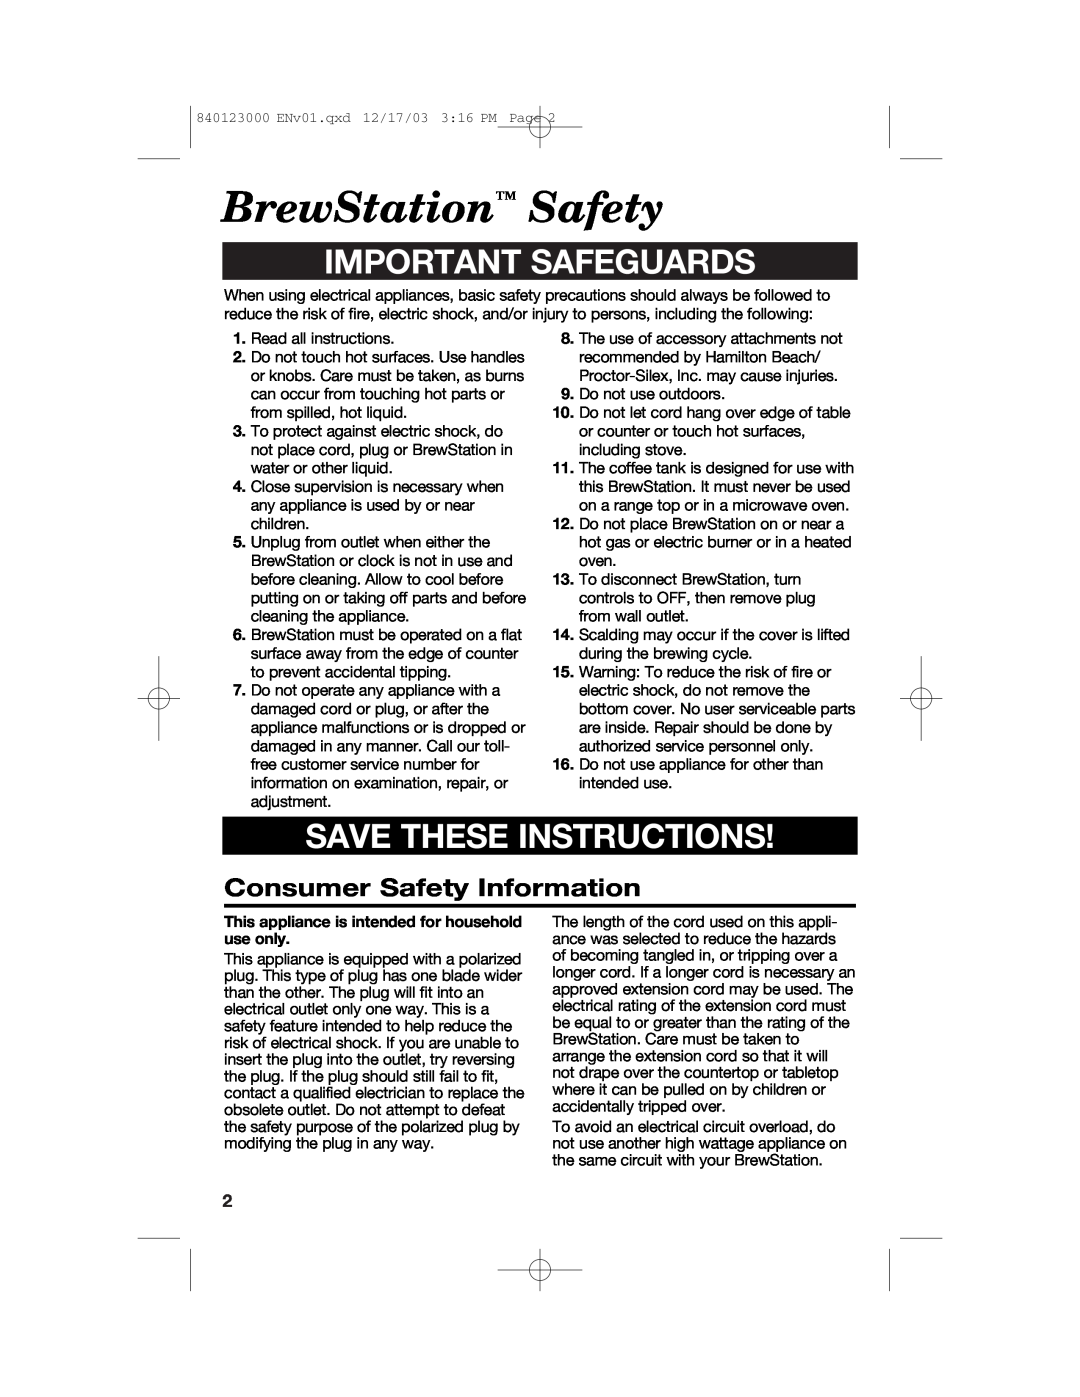 Hamilton Beach 840123000 BrewStation Safety, Important Safeguards, Save These Instructions, Consumer Safety Information 